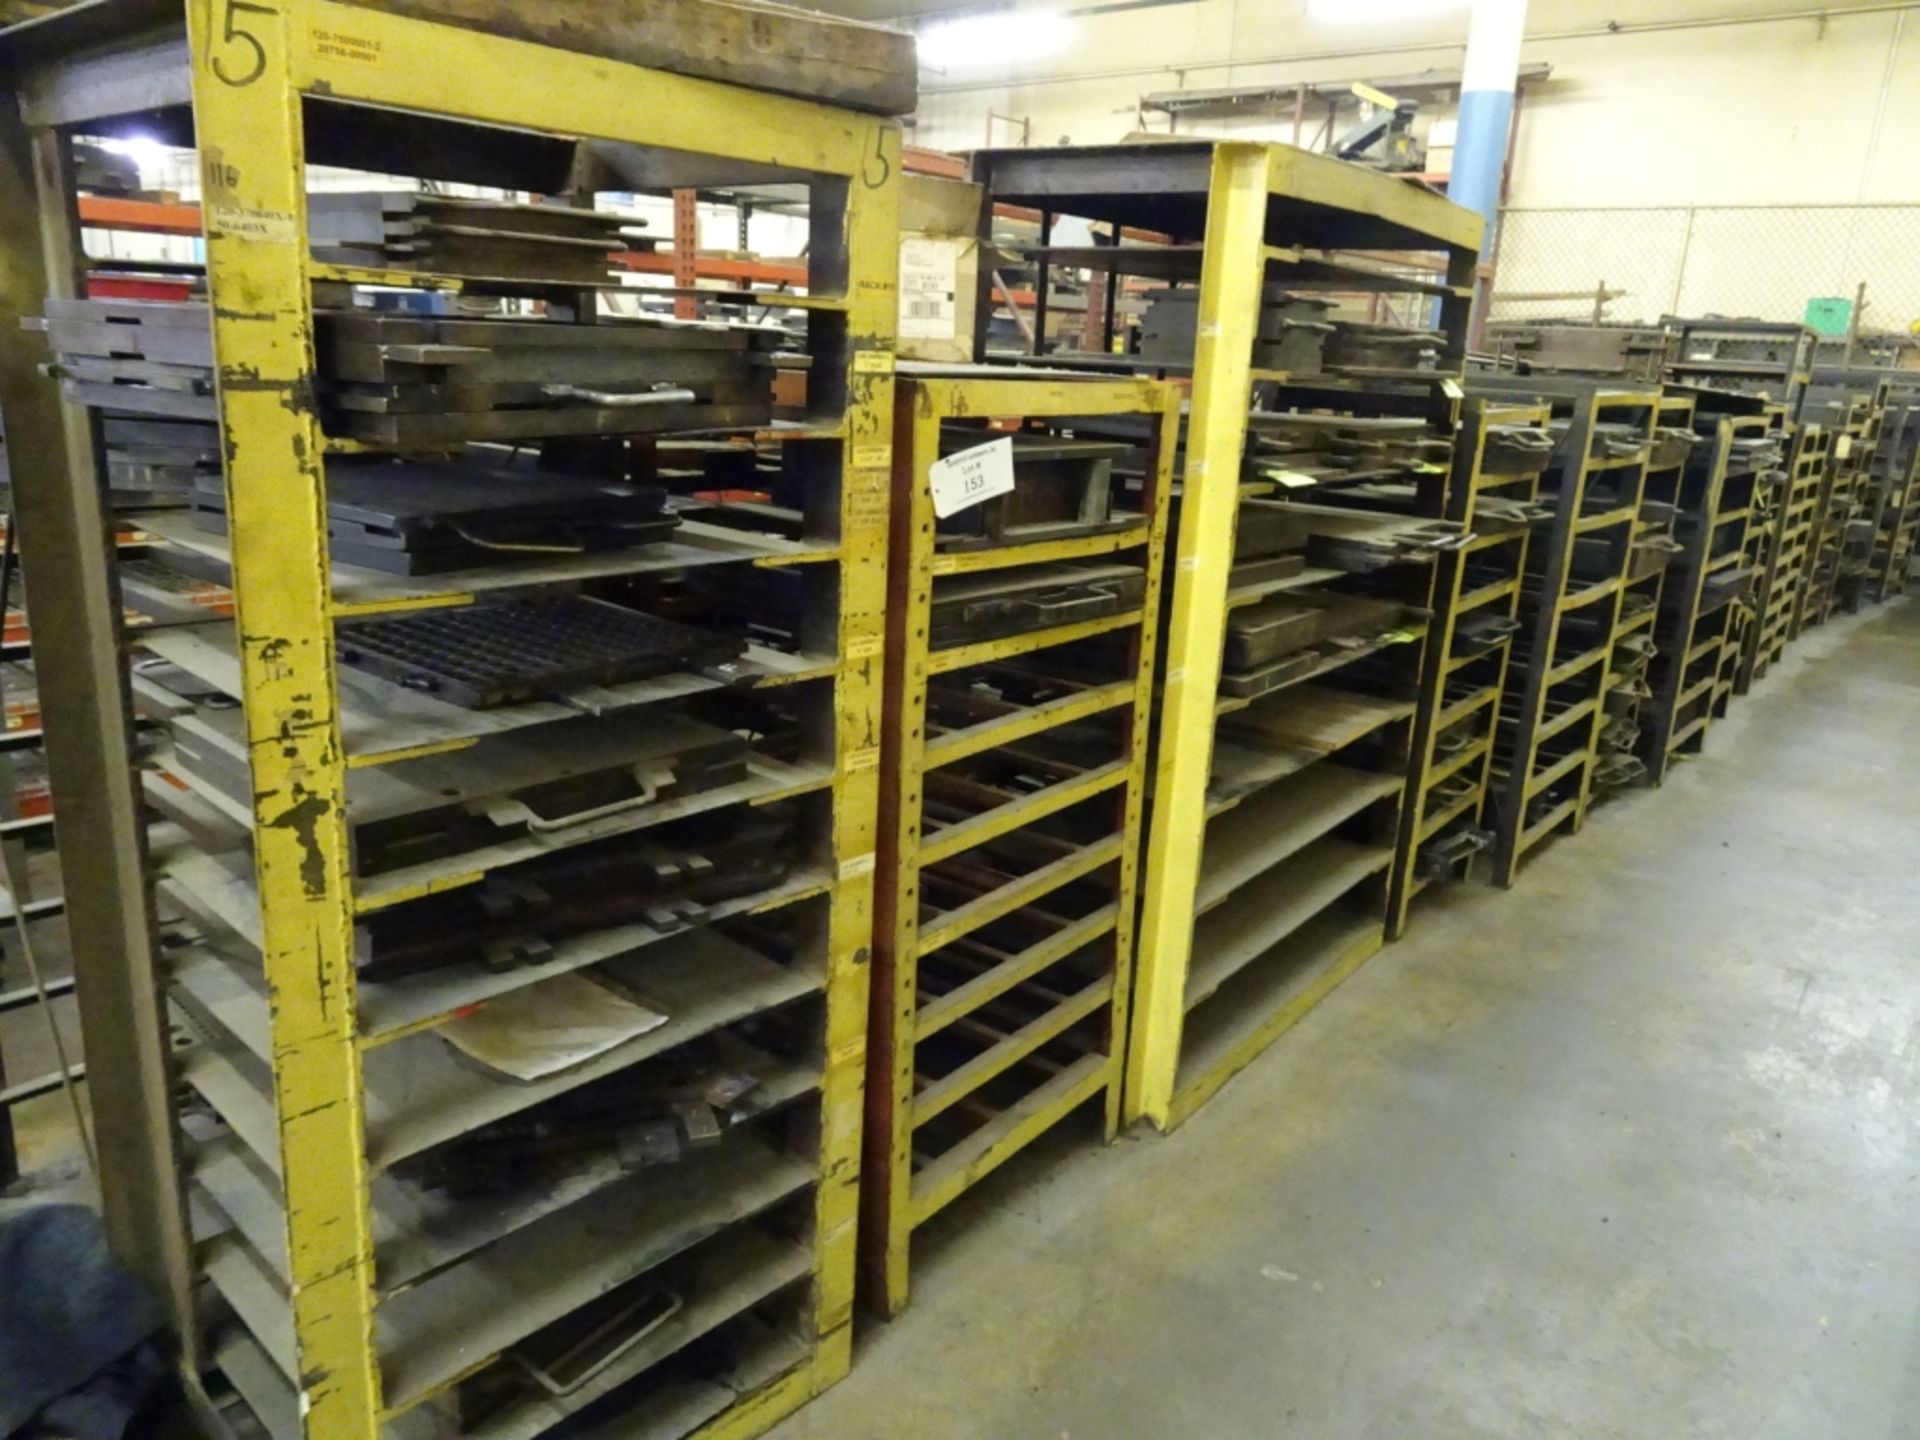 (15) Various Sized Heavy Duty Steel Mold Racks With No Contents